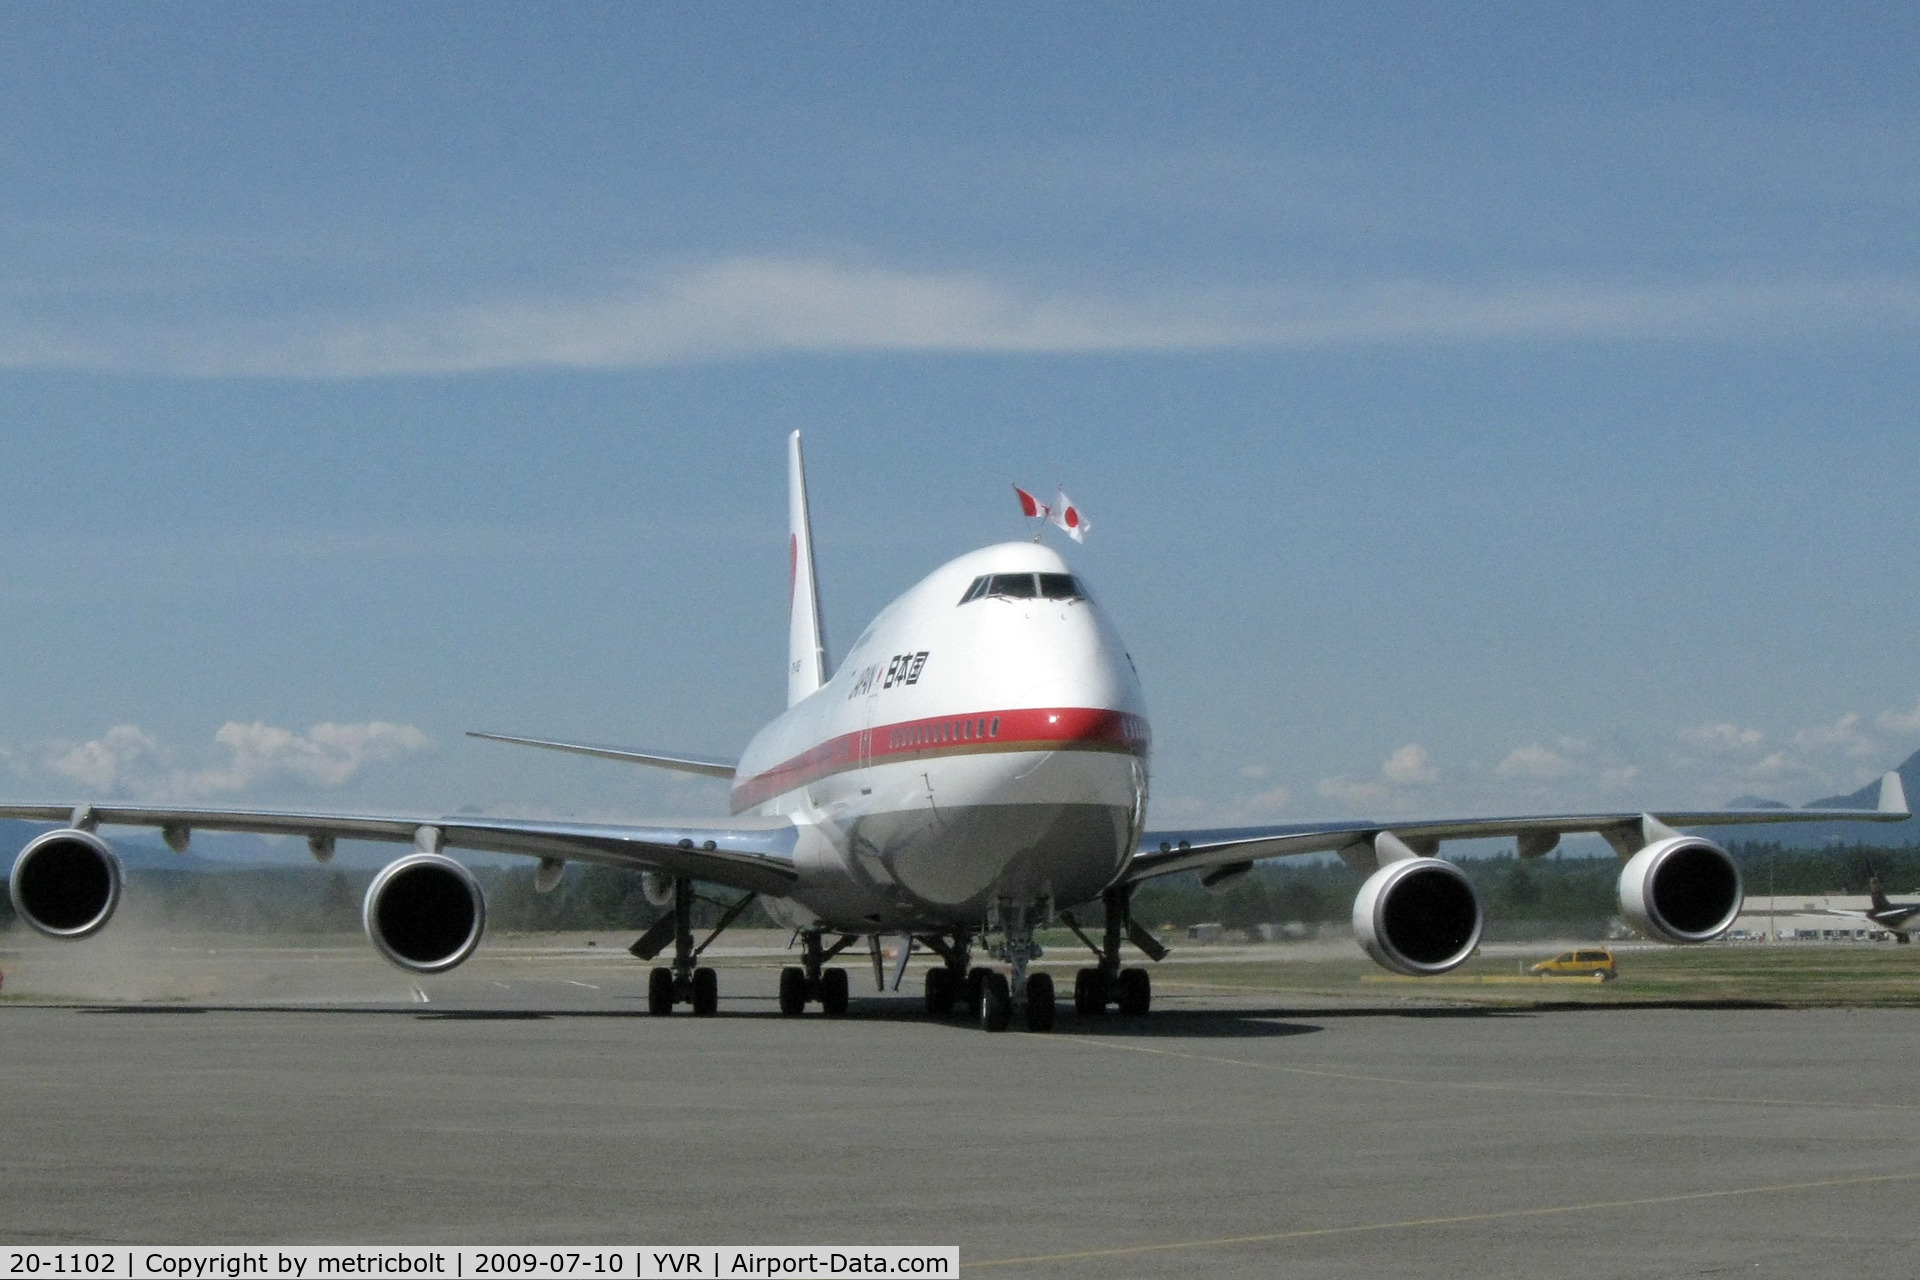 20-1102, 1991 Boeing 747-47C C/N 24731/0839, Emperor of Japan arrives in Vancouver on his Canadian tour